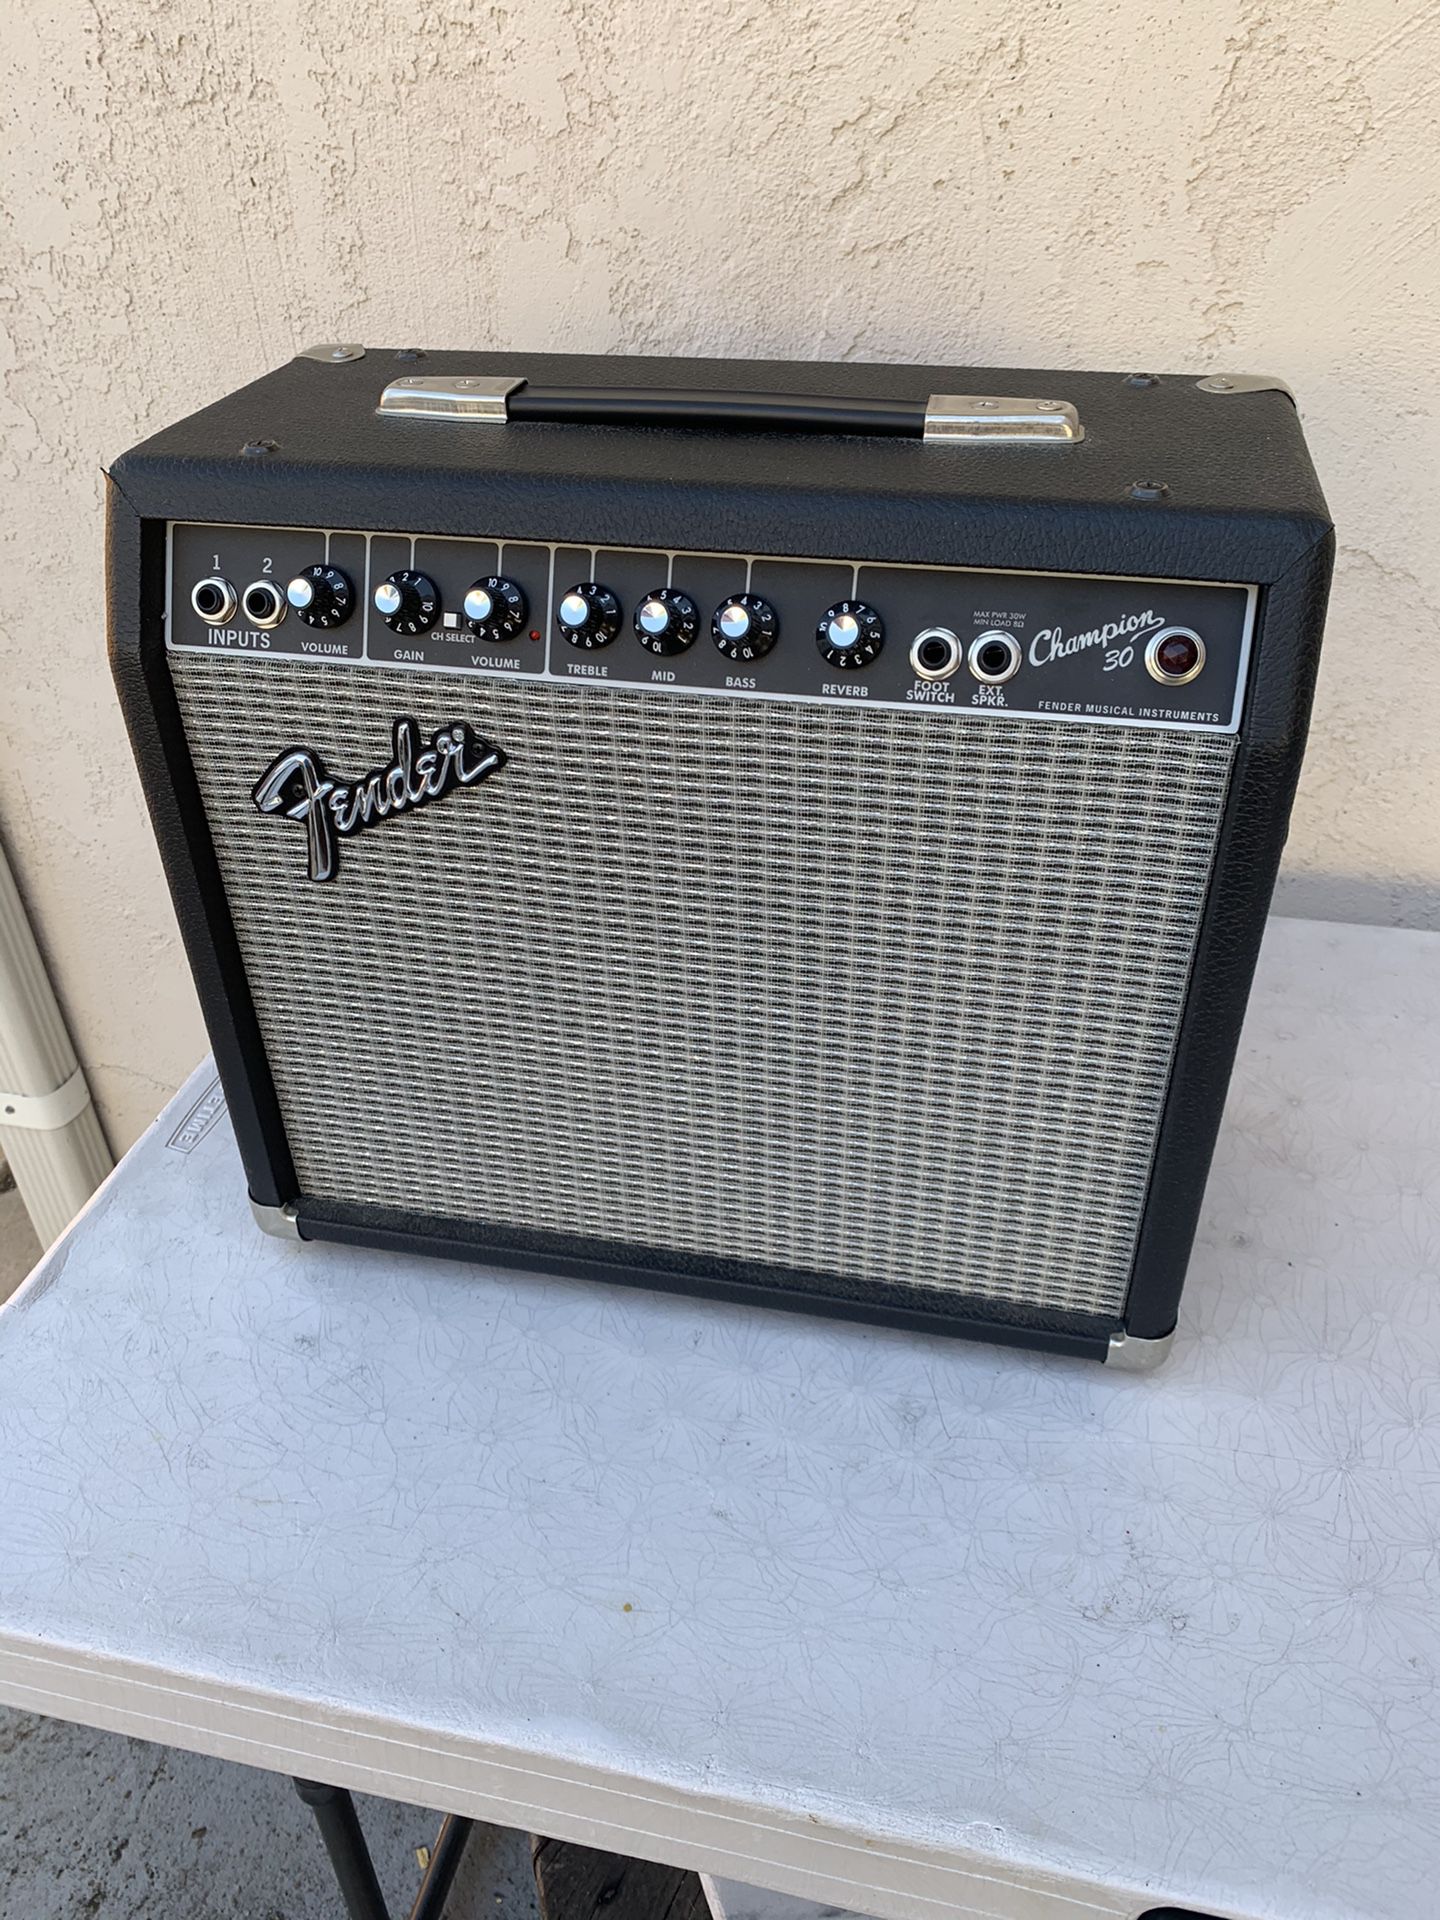 Fender champion 30 amplifier acoustic or electric guitar and pedals